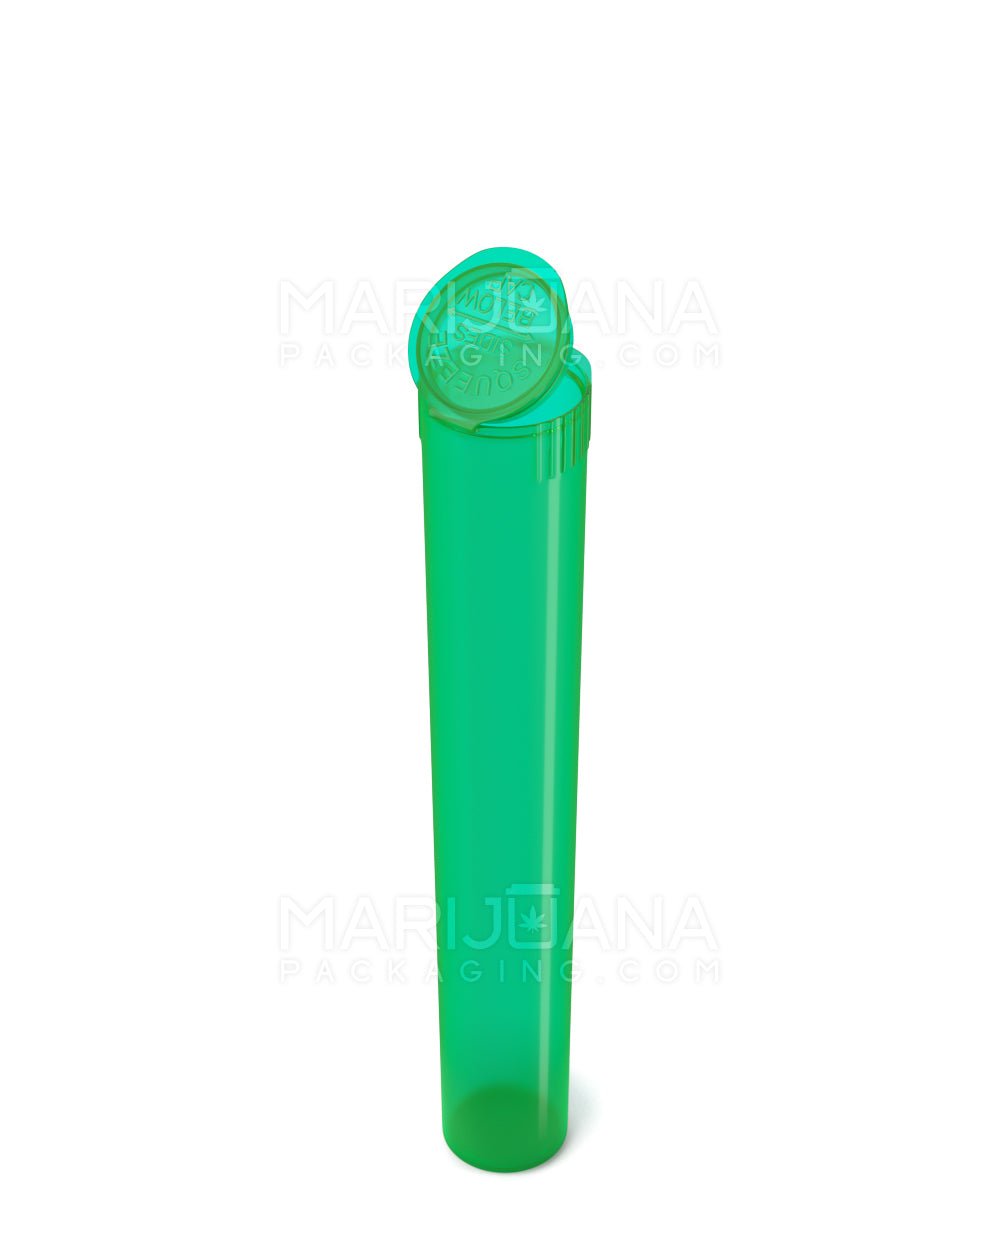 Child Resistant | King Size Pop Top Translucent Plastic Pre-Roll Tubes | 116mm - Green - 1000 Count - 4